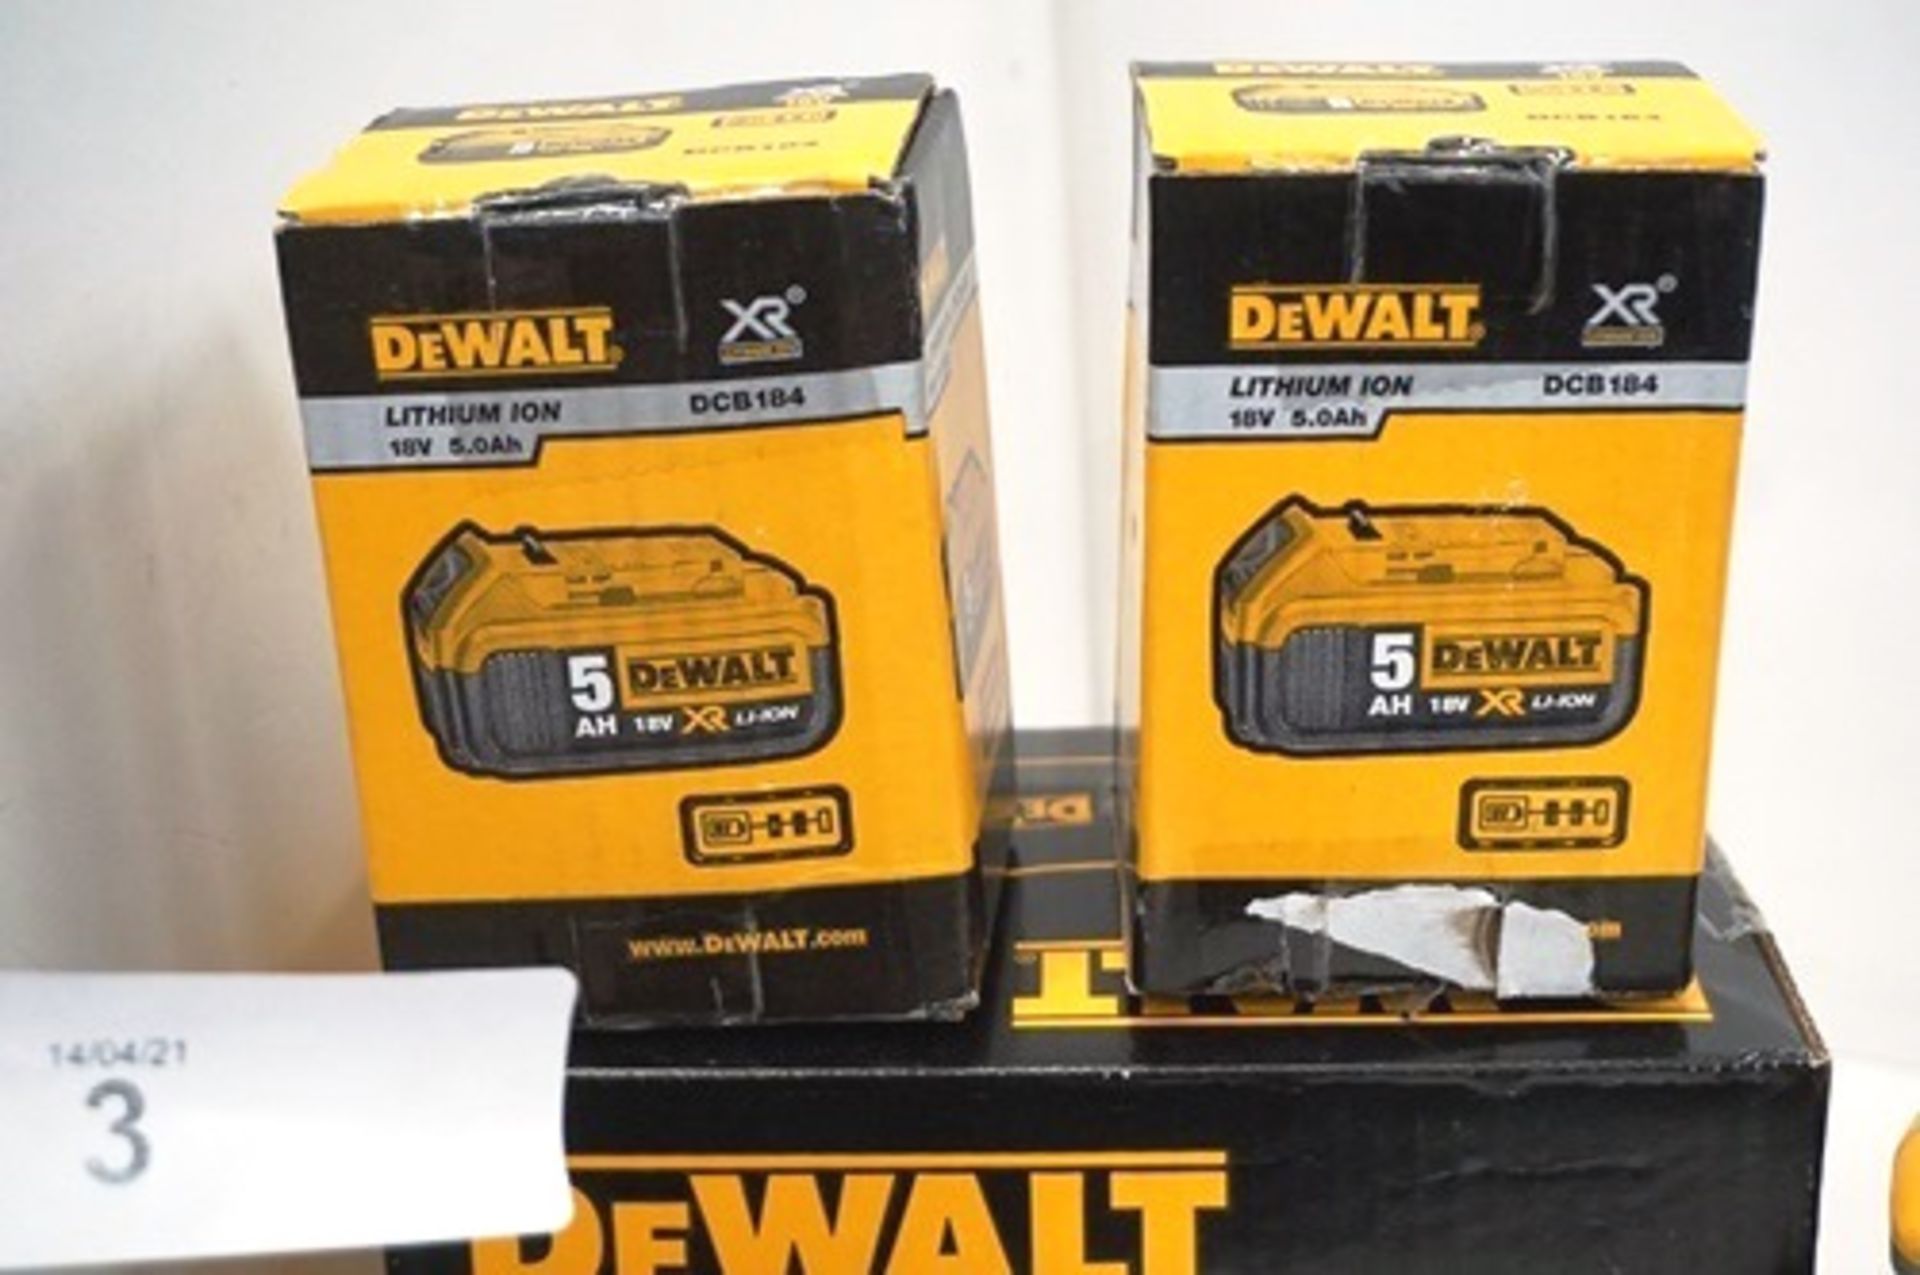 1 x DeWalt cordless jigsaw, model DCS331, second-hand, together with 2 x 18V batteries and - Image 3 of 5